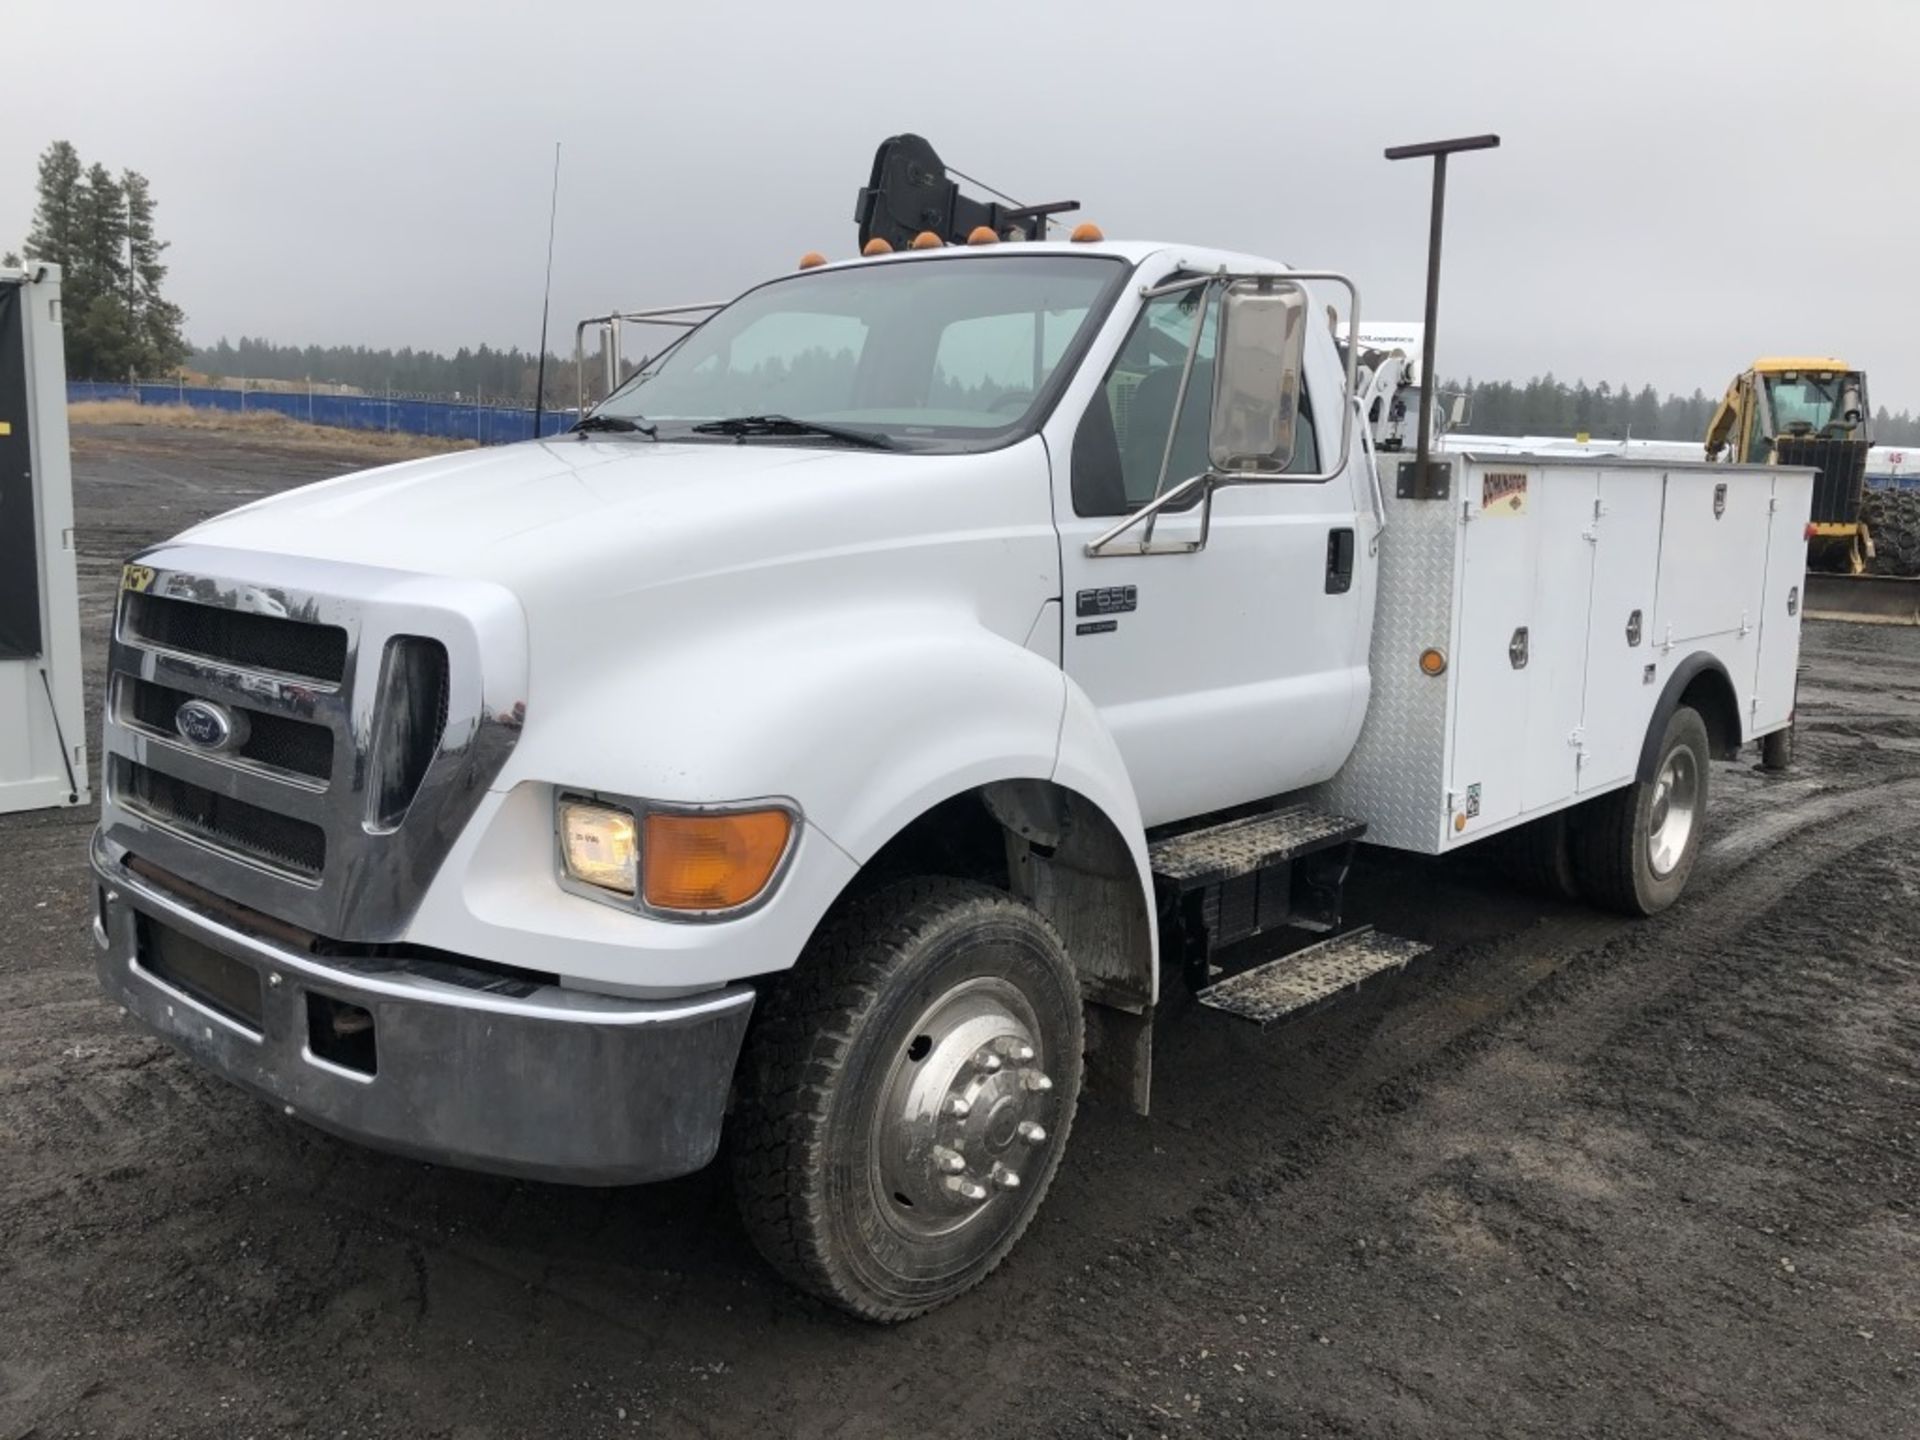 2005 Ford F650 Pro-Loader Service Truck - Image 2 of 23